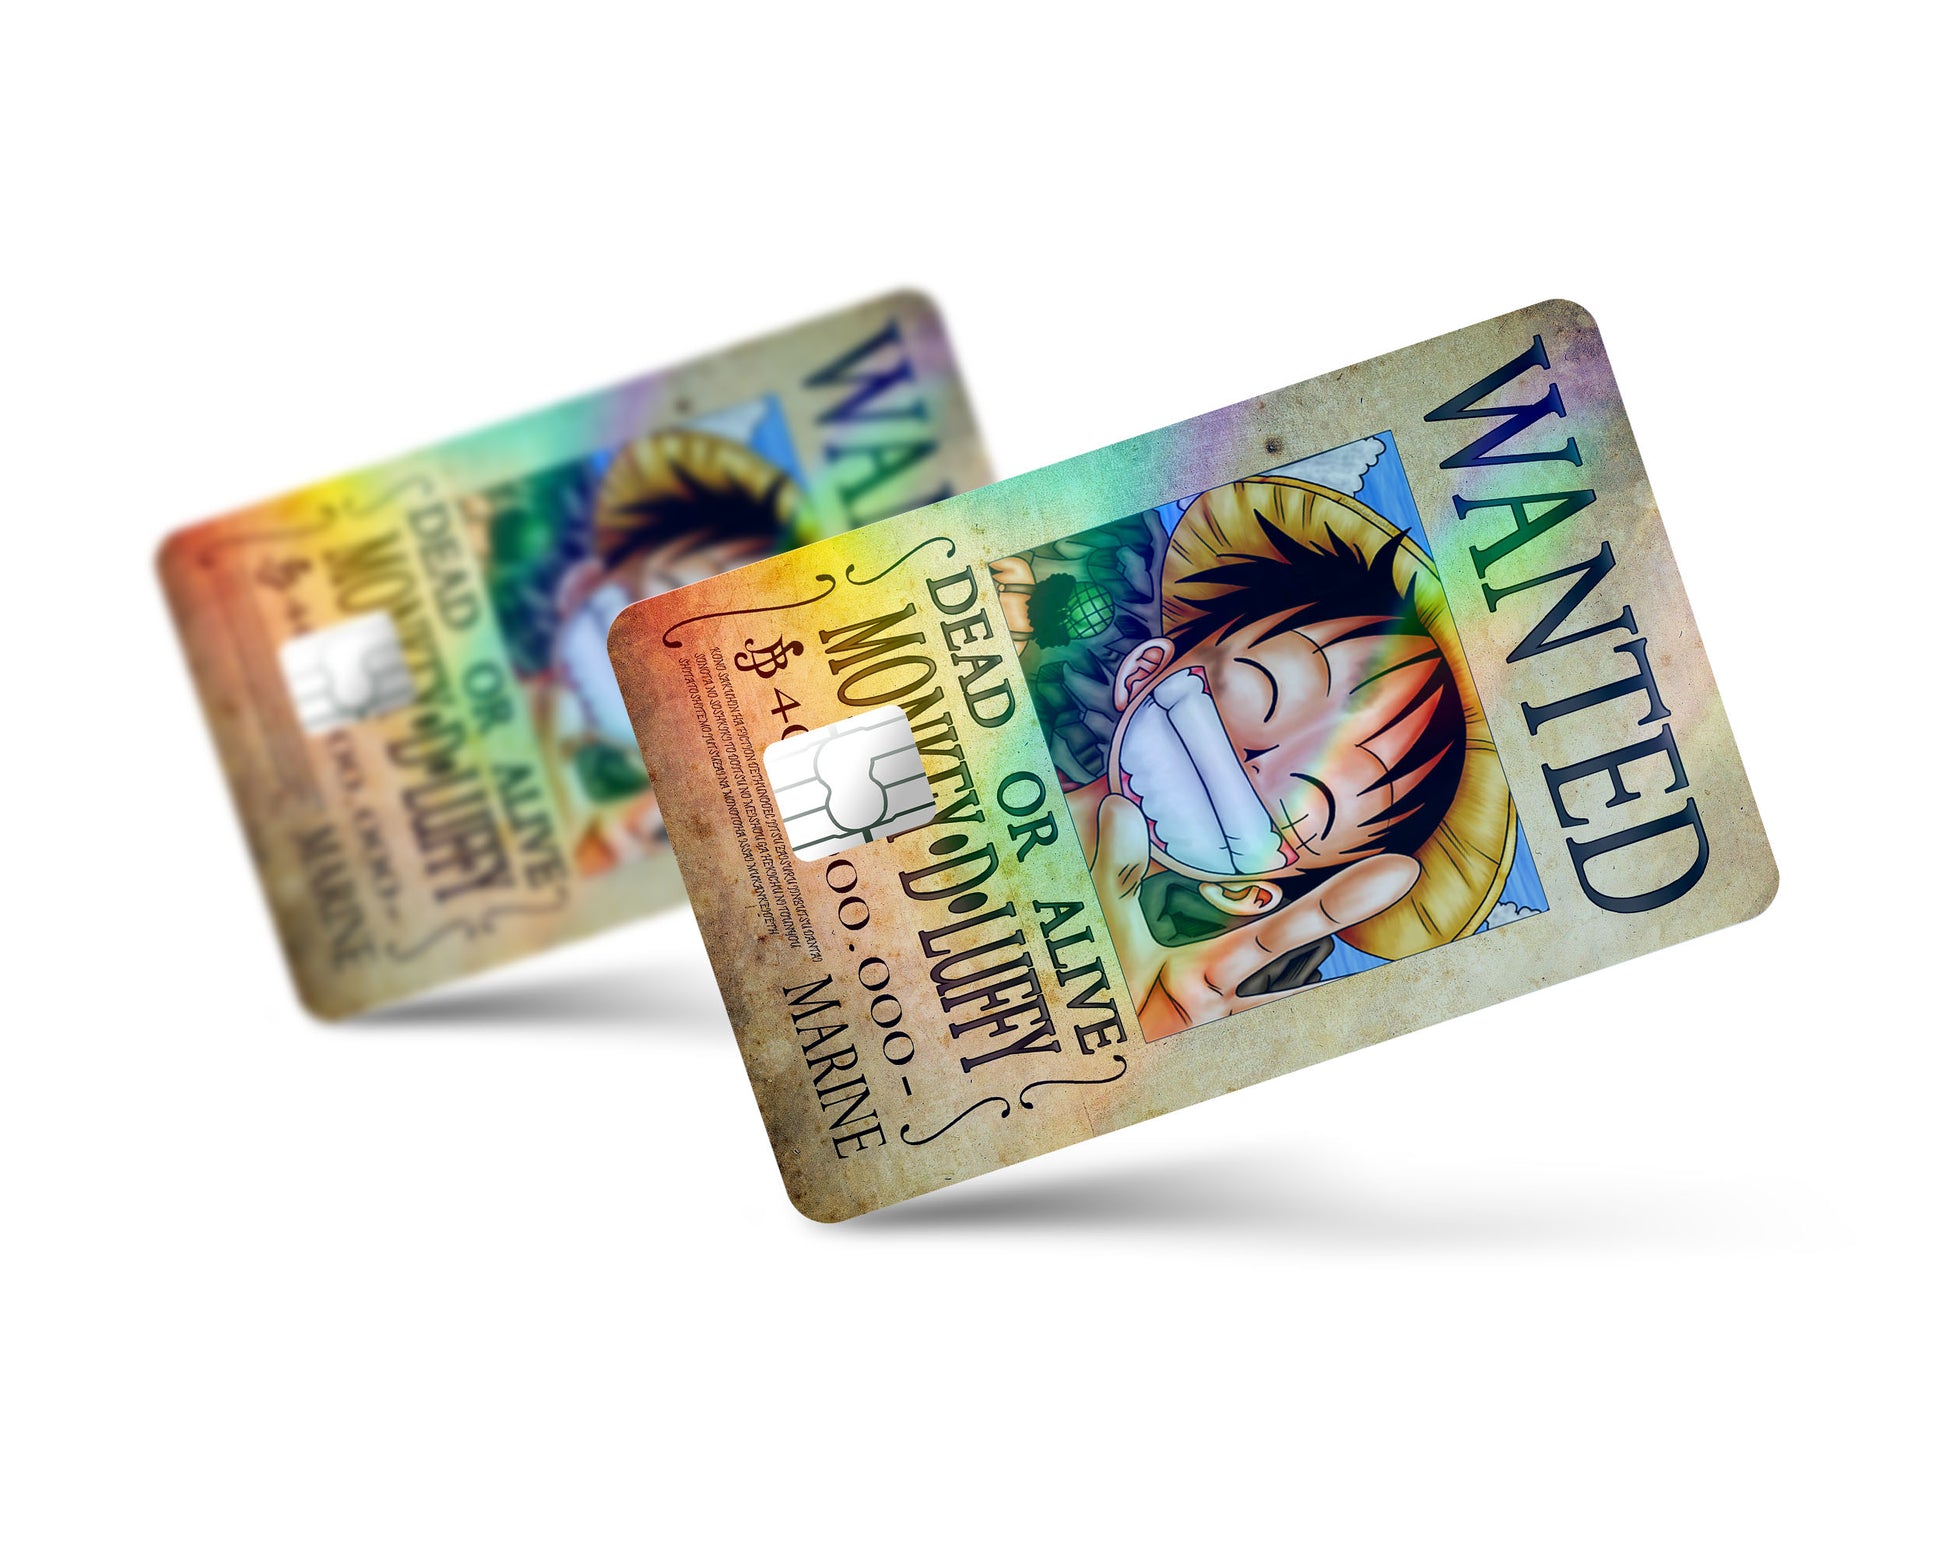  Holographic Credit Card Skin Sticker Cover/Anime Style Debit  Cards Stickers Decal (3) : Office Products